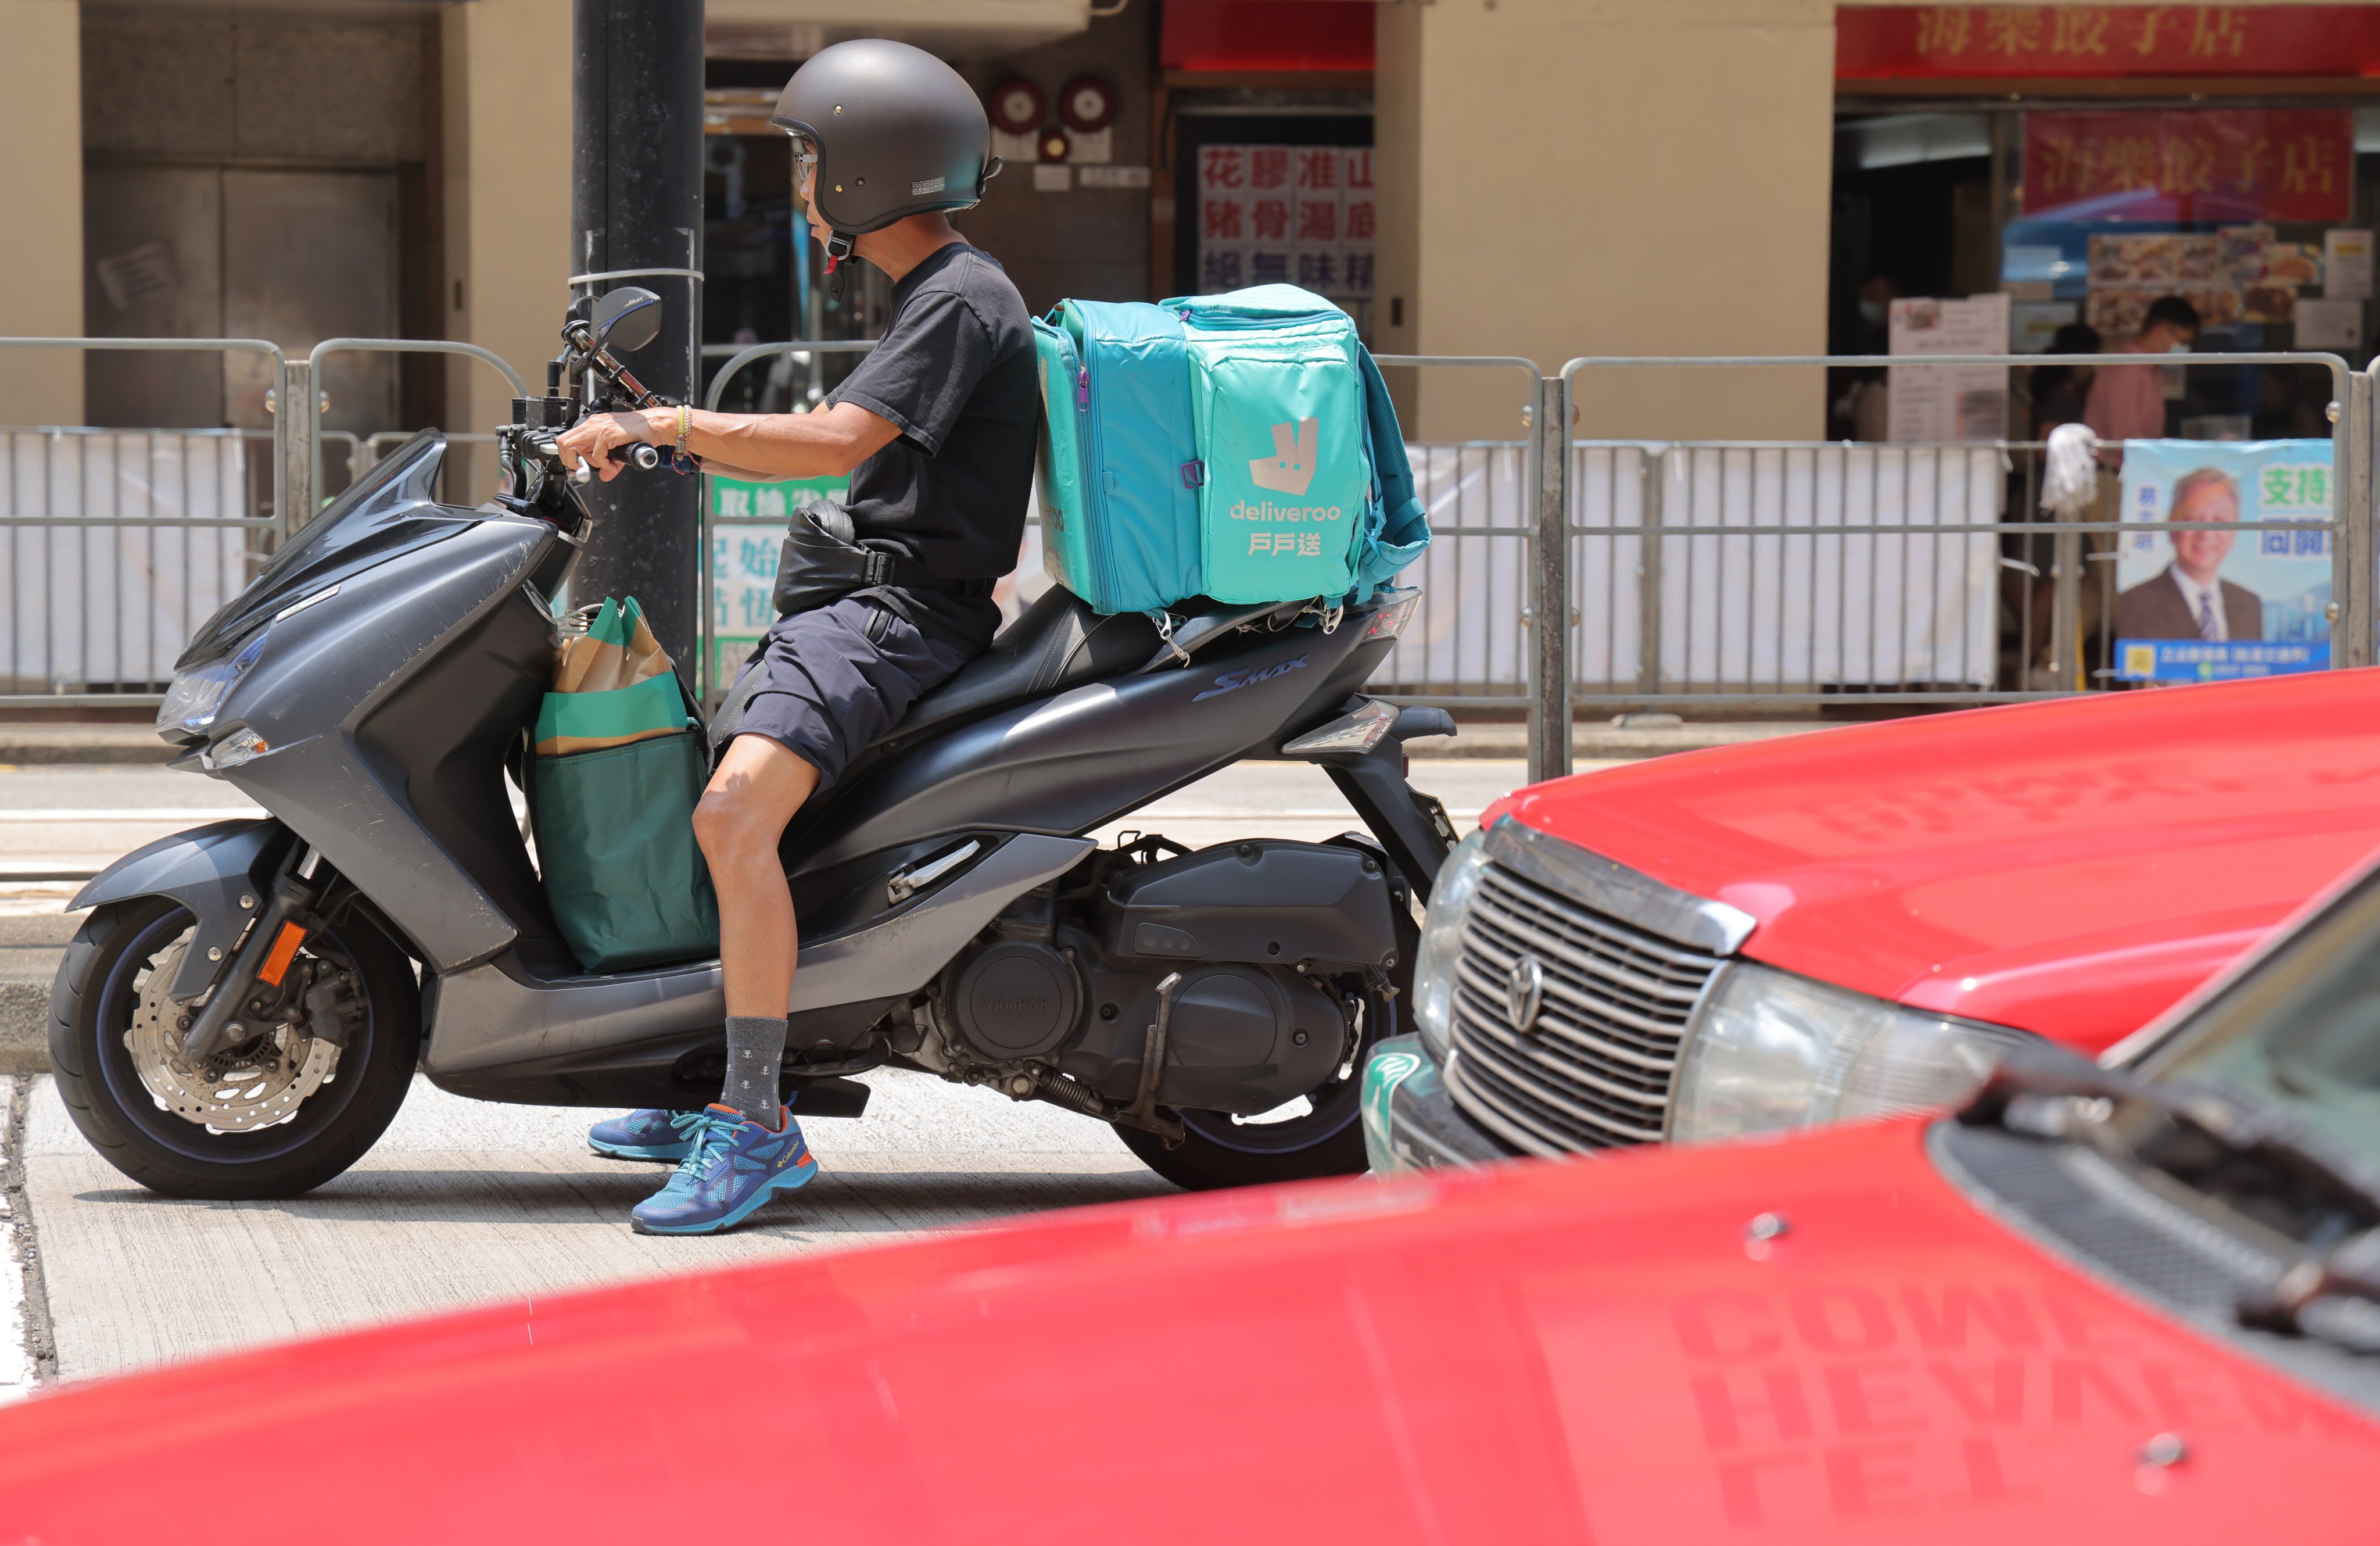 A Deliveroo rider on the job in Hong Kong. Photo: Jelly Tse